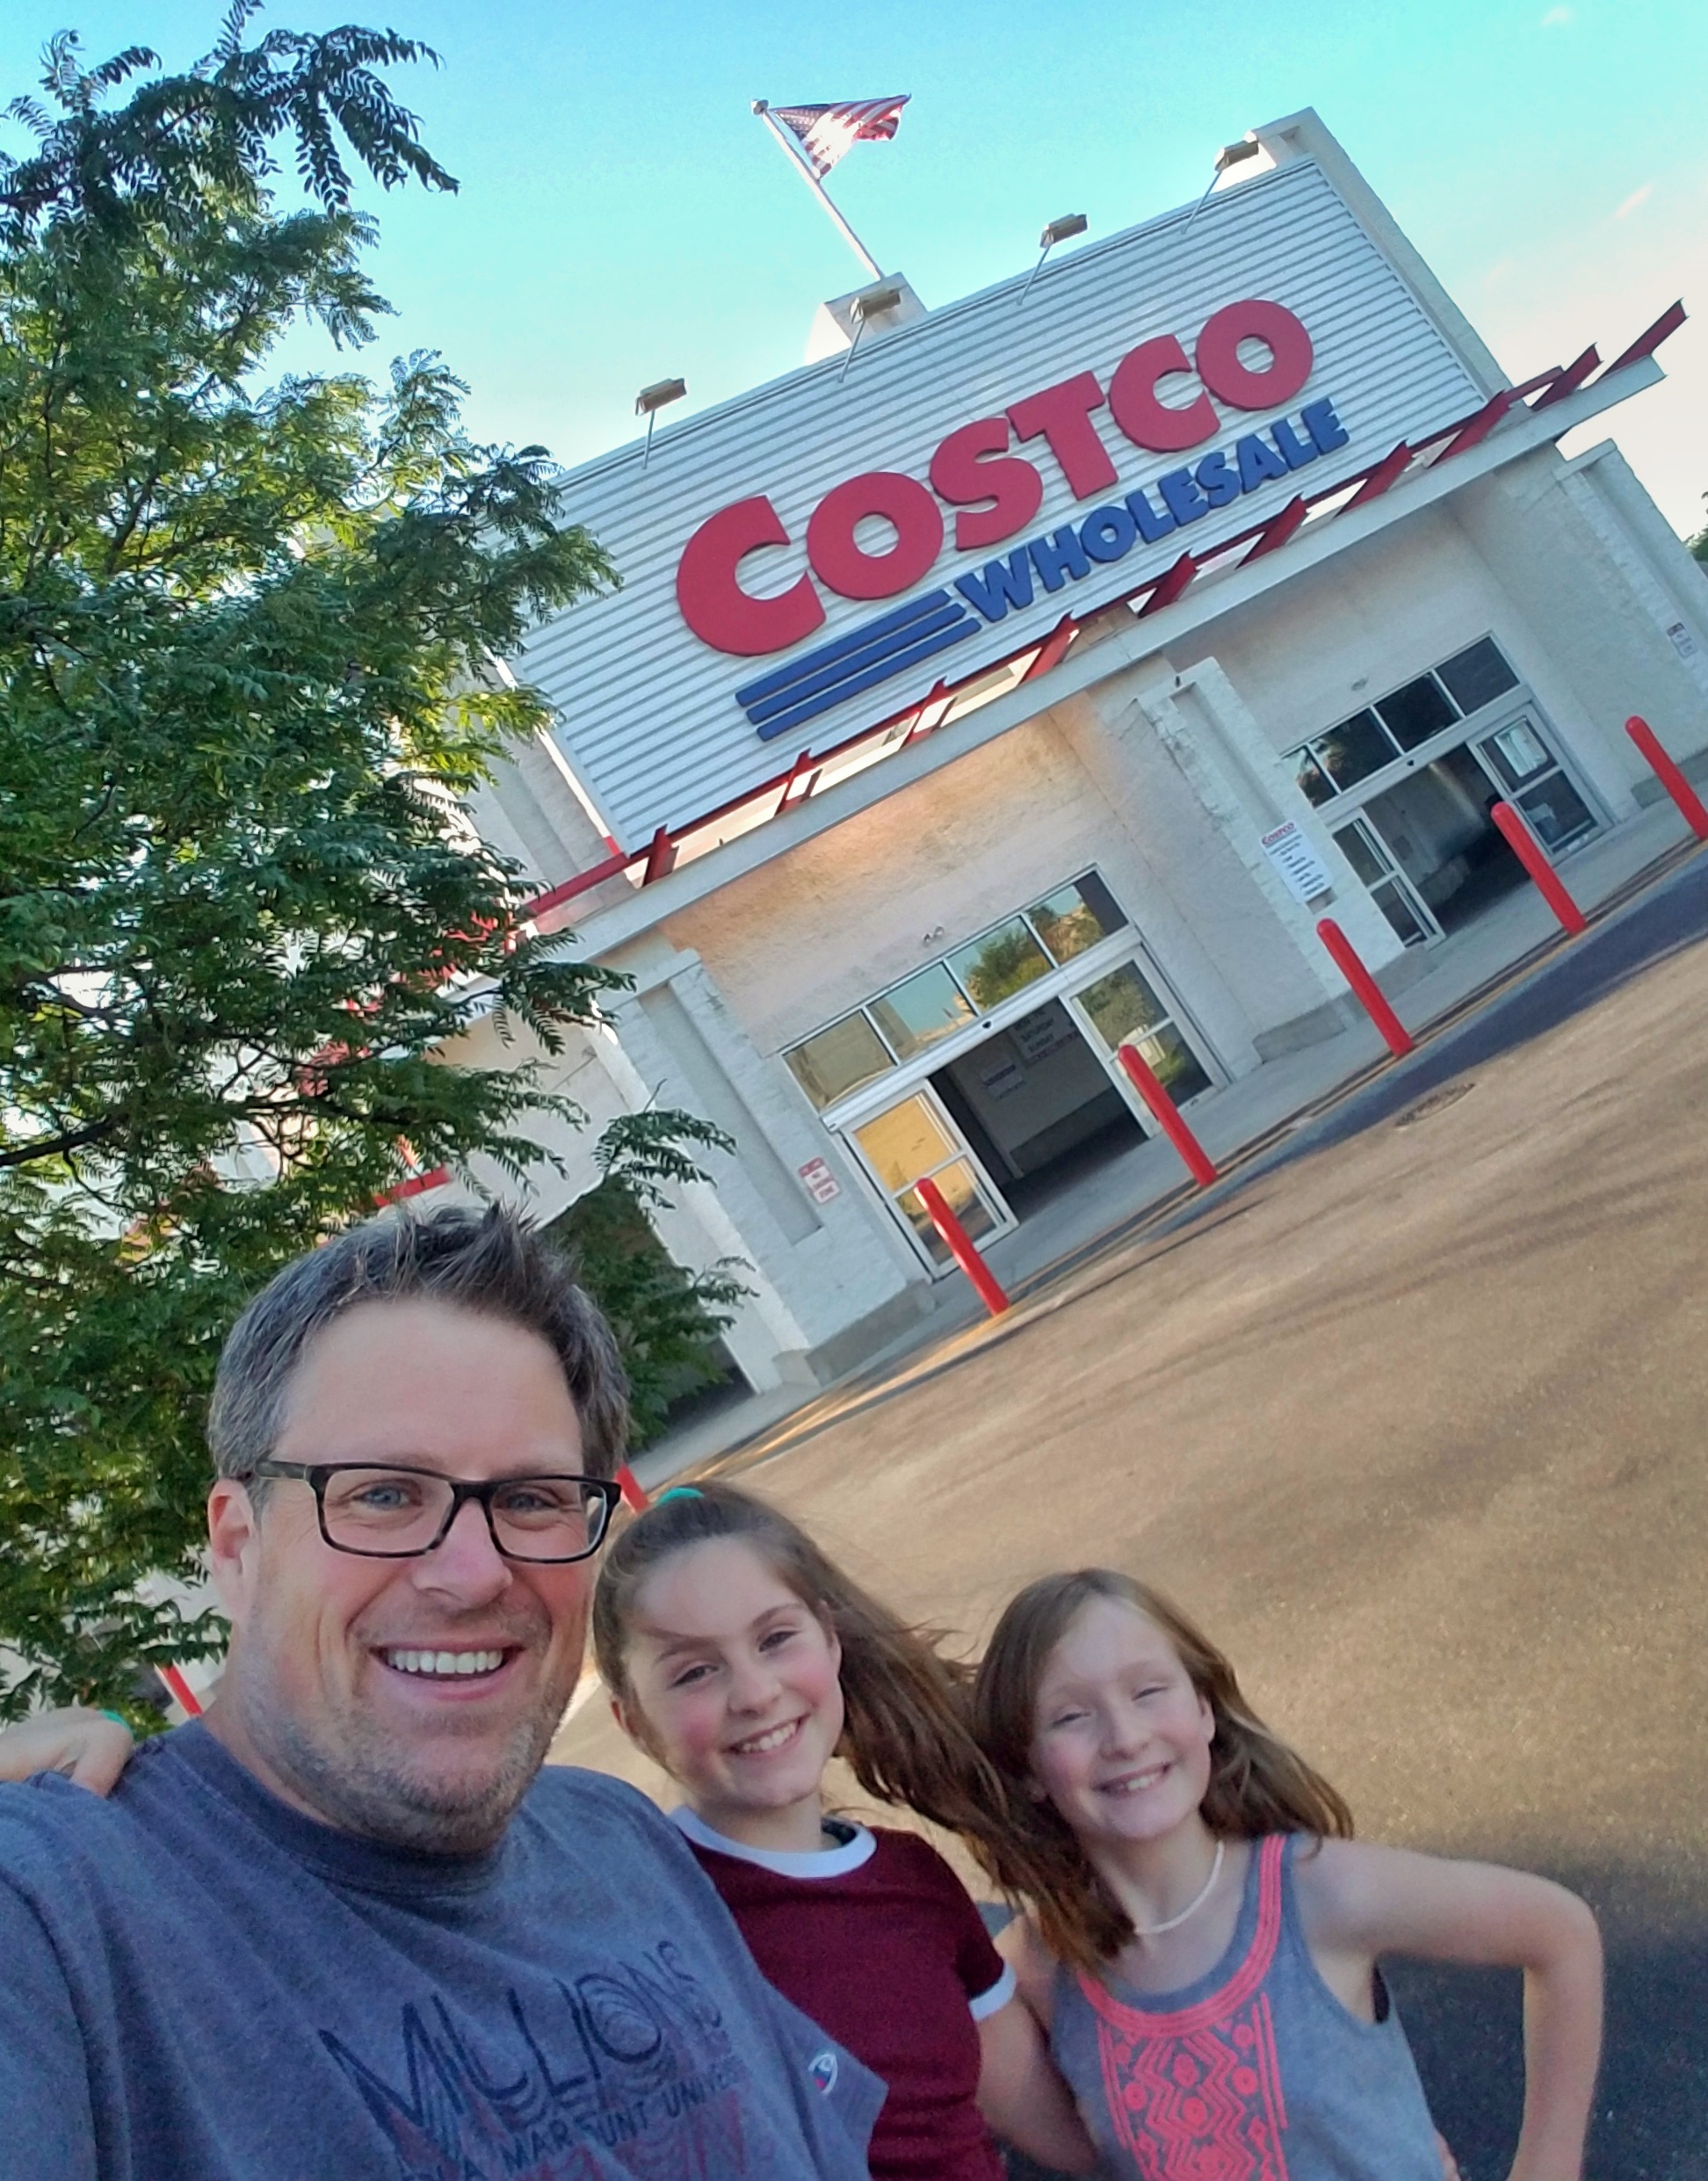 shopping at Costco with kids samples Costco